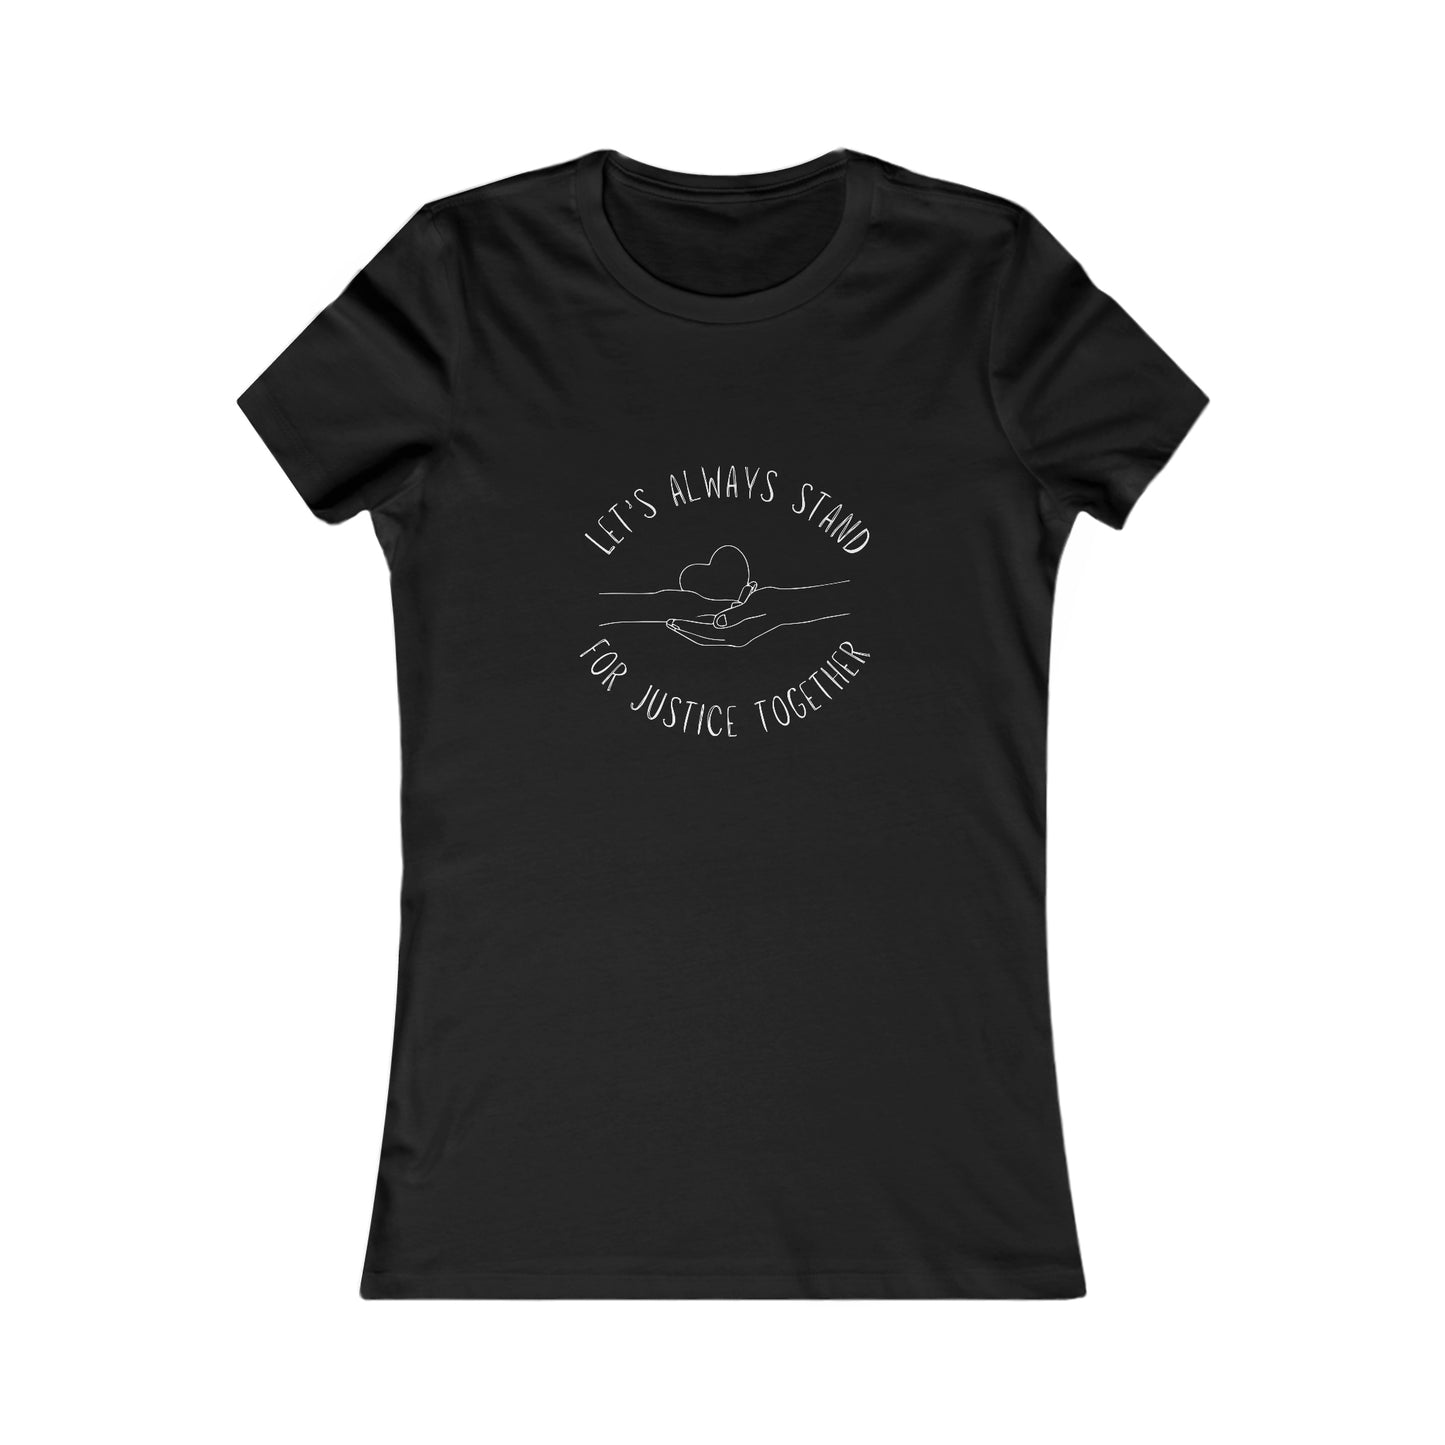 Let's Always Stand for Justice Women's Tee